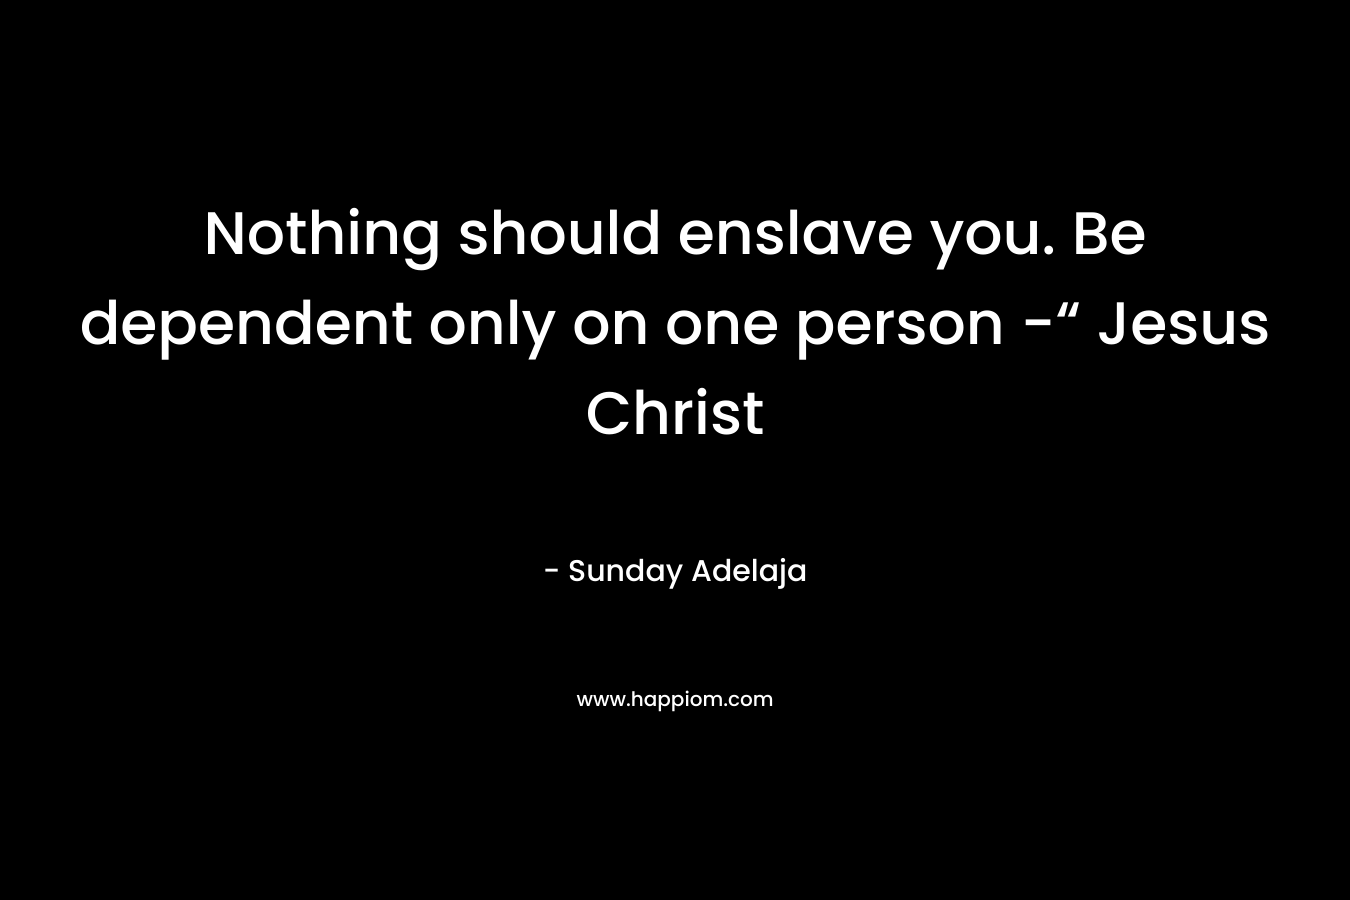 Nothing should enslave you. Be dependent only on one person -“ Jesus Christ